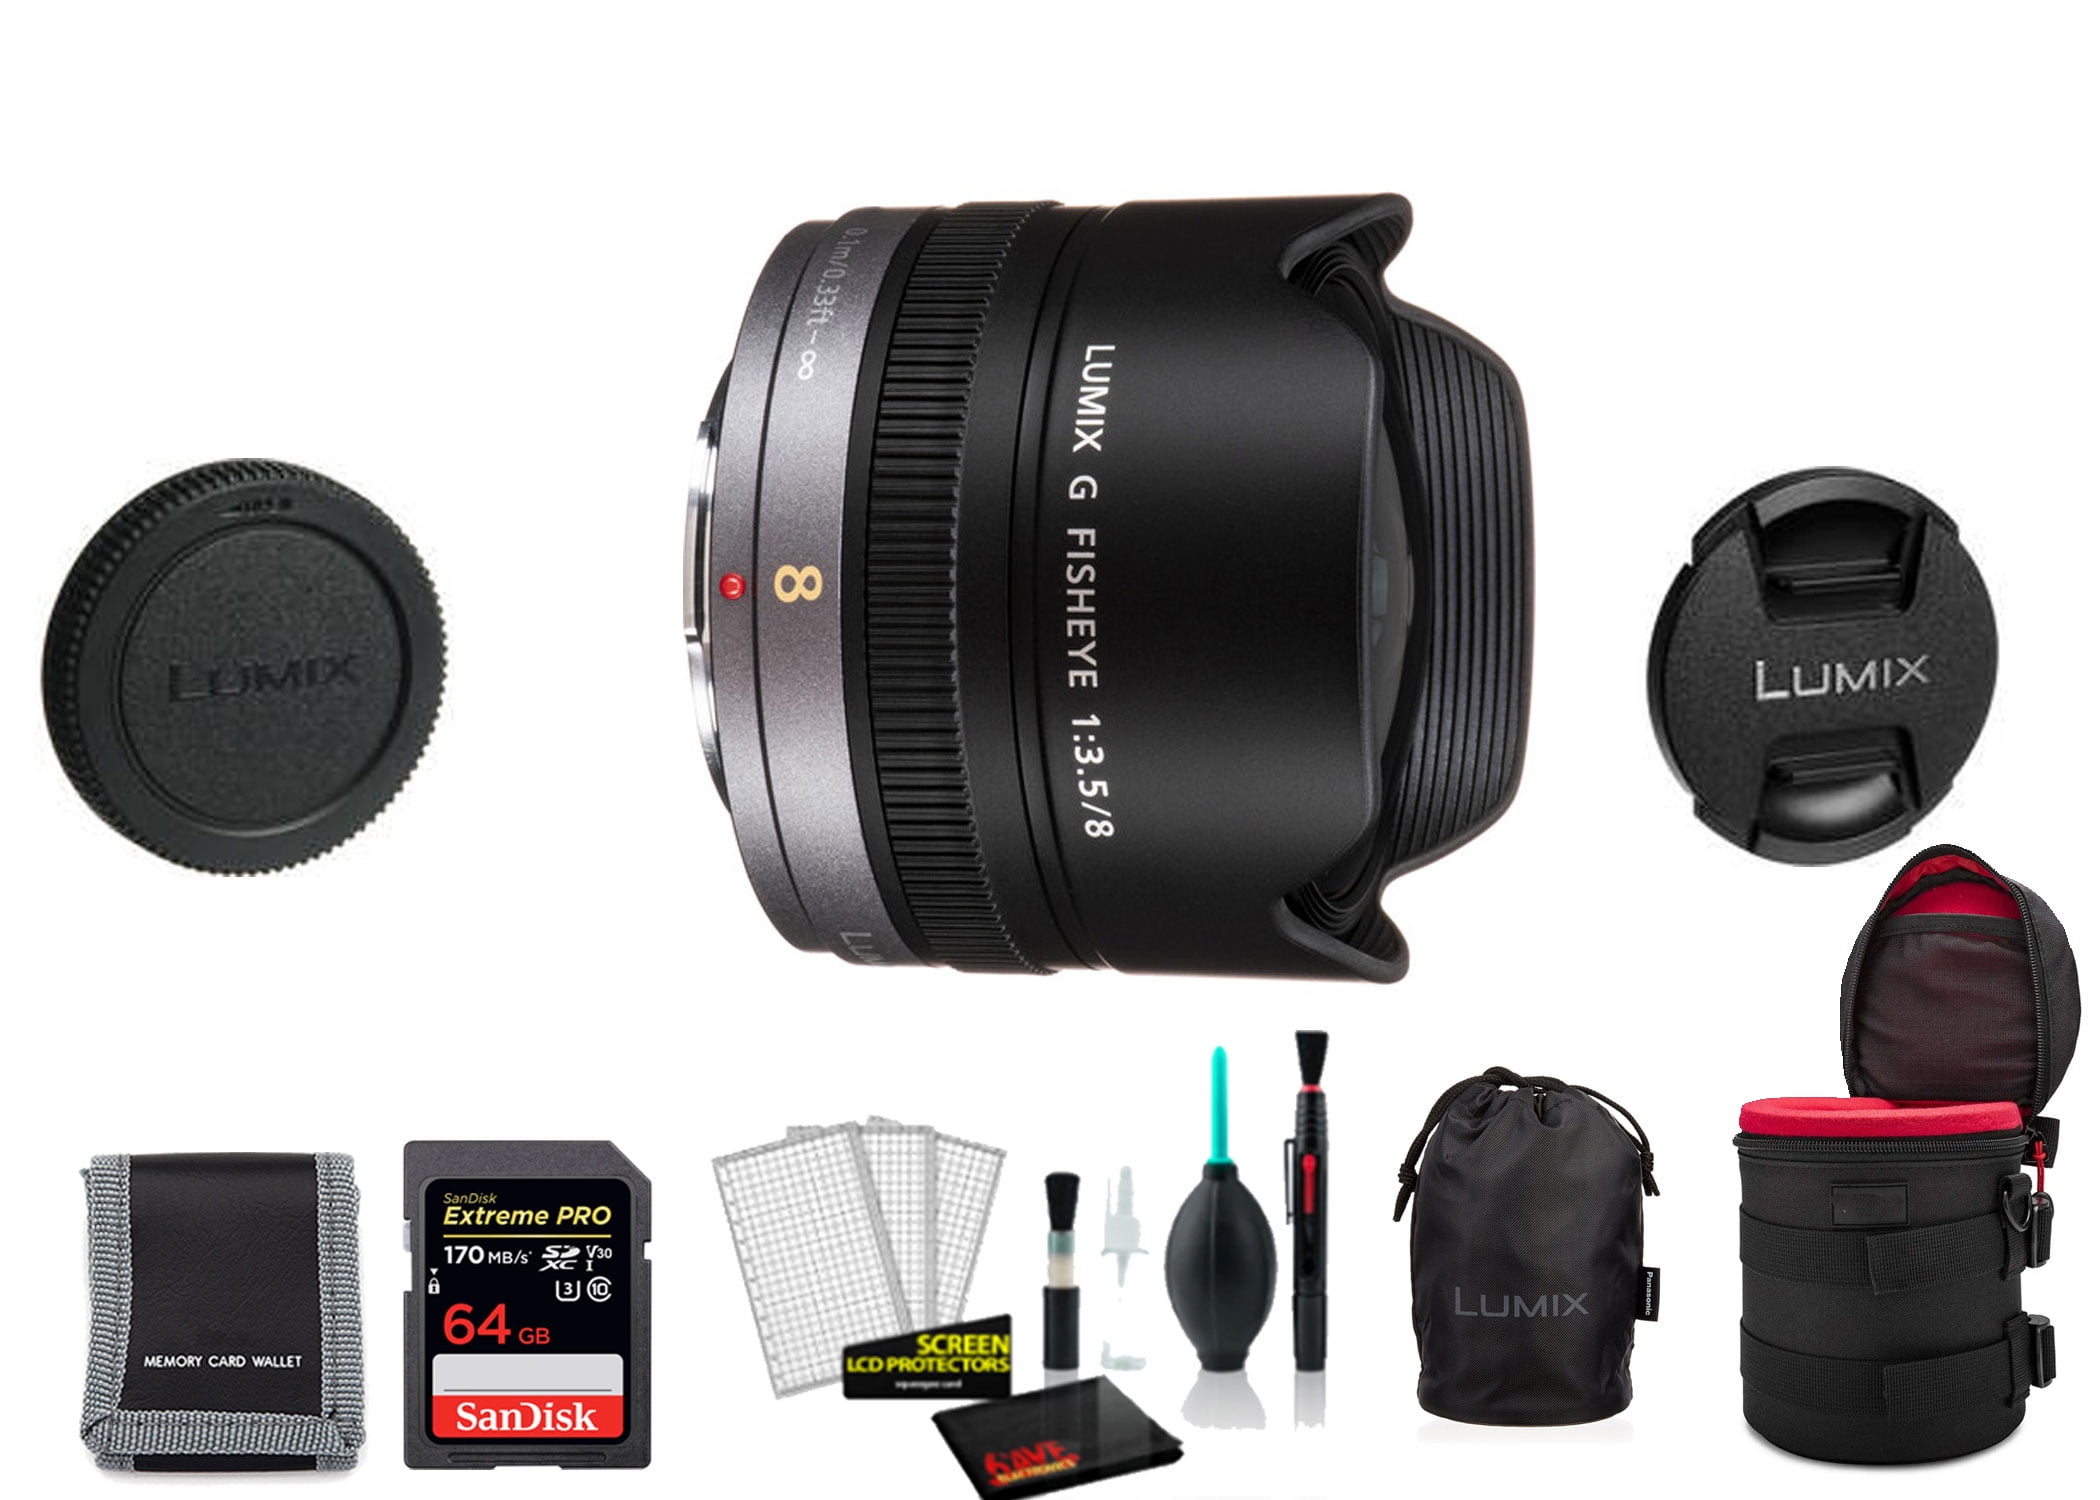 Panasonic Lumix G Fisheye 8mm f/3.5 Lens, Micro Four Thirds, H-F008 -  Bundle with 64GB Memory Card and More